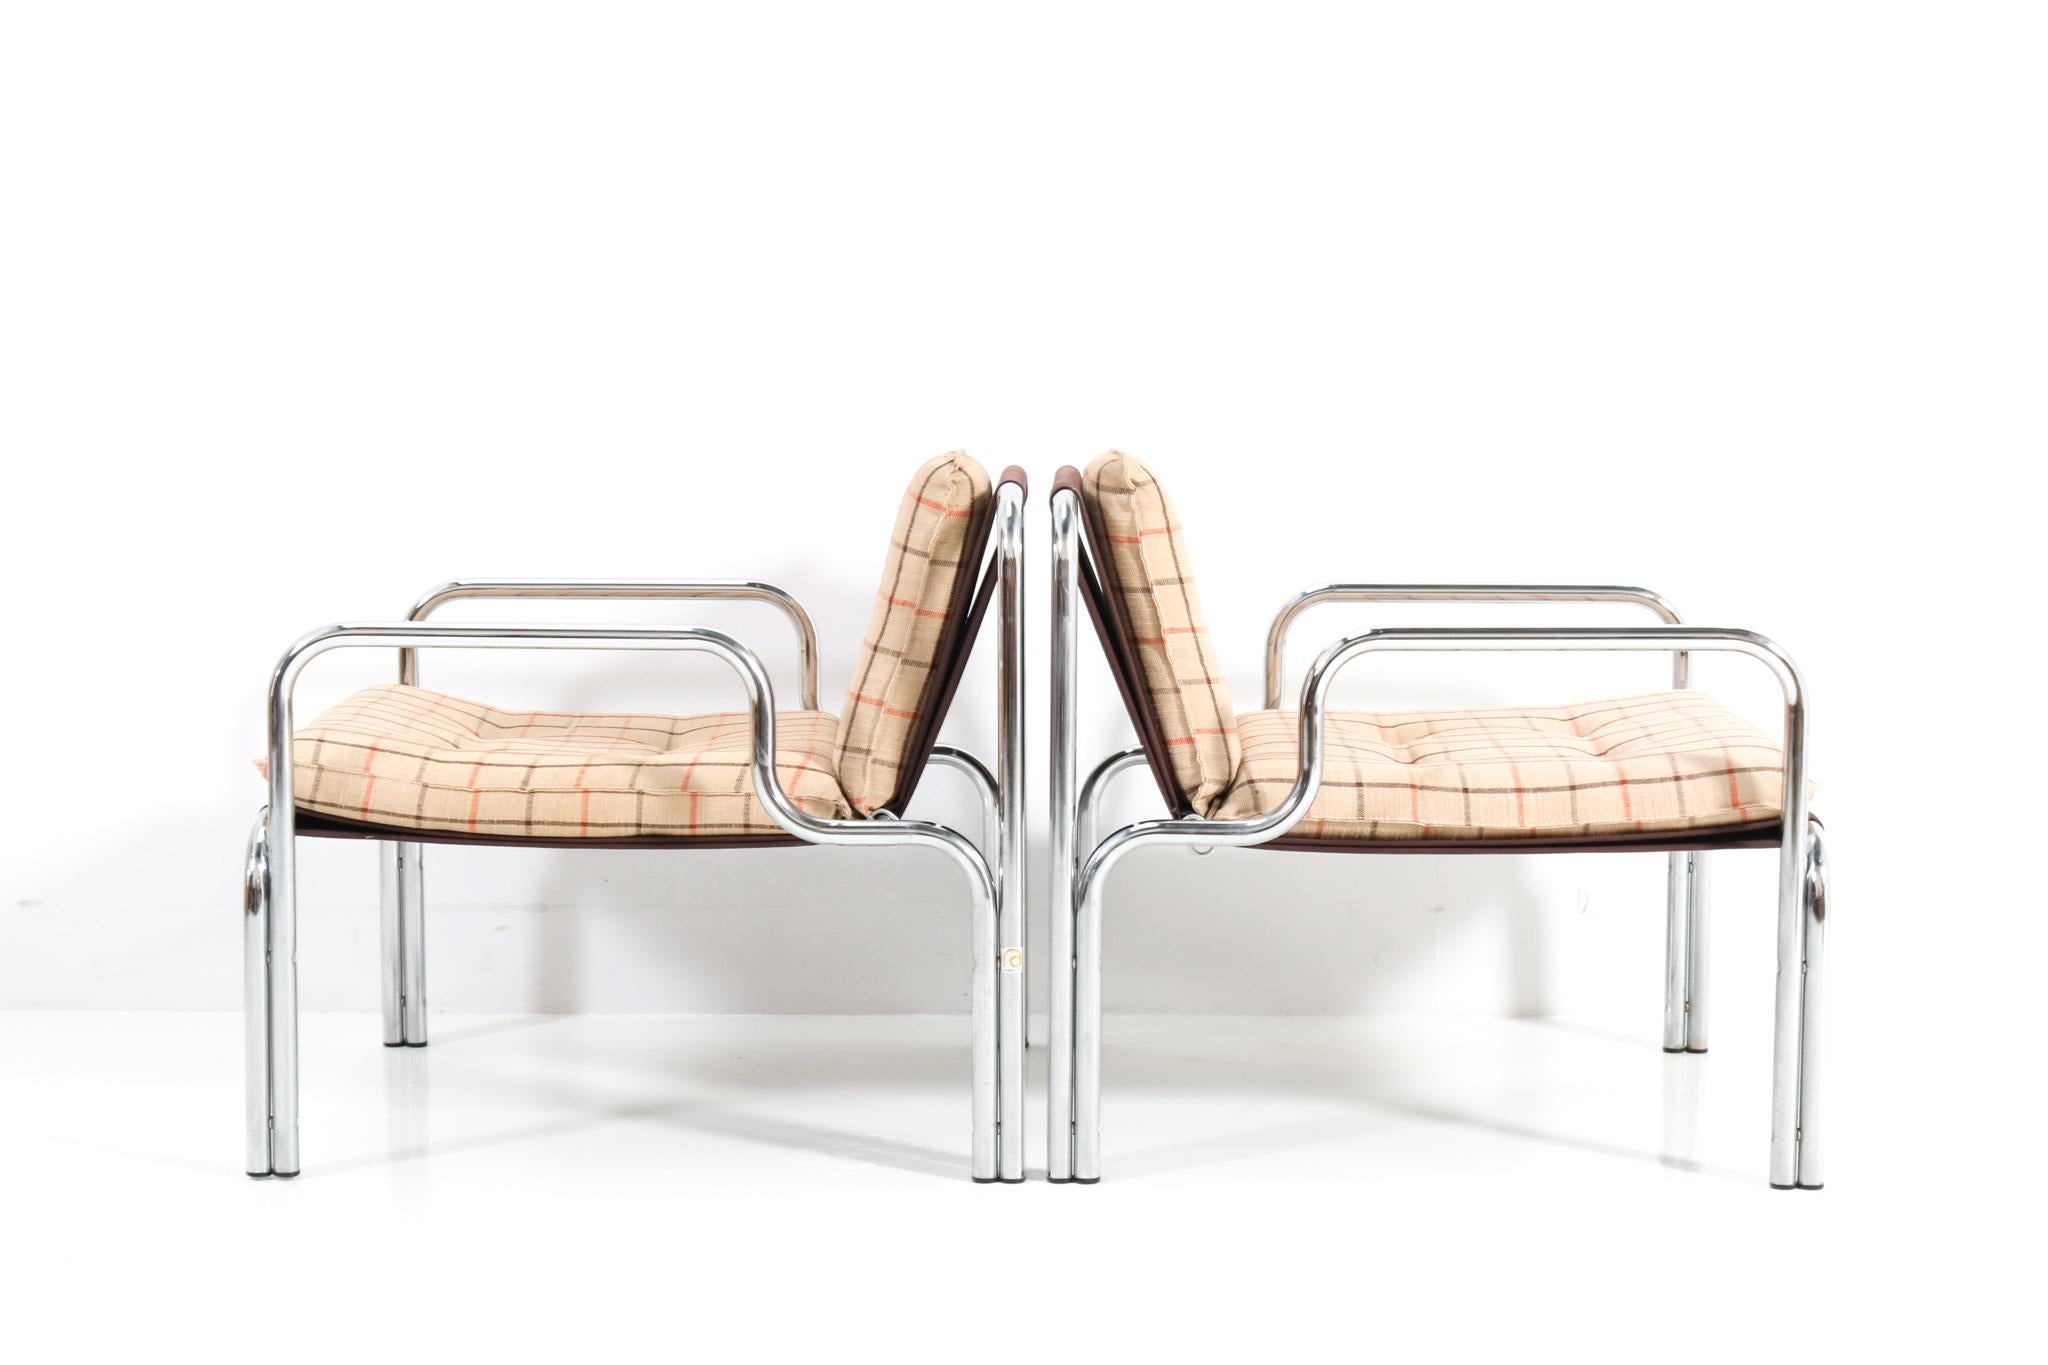 Late 20th Century Pair of Mid-Century Modern Lounge Chairs by Wim Ypma for Riemersma, 1973